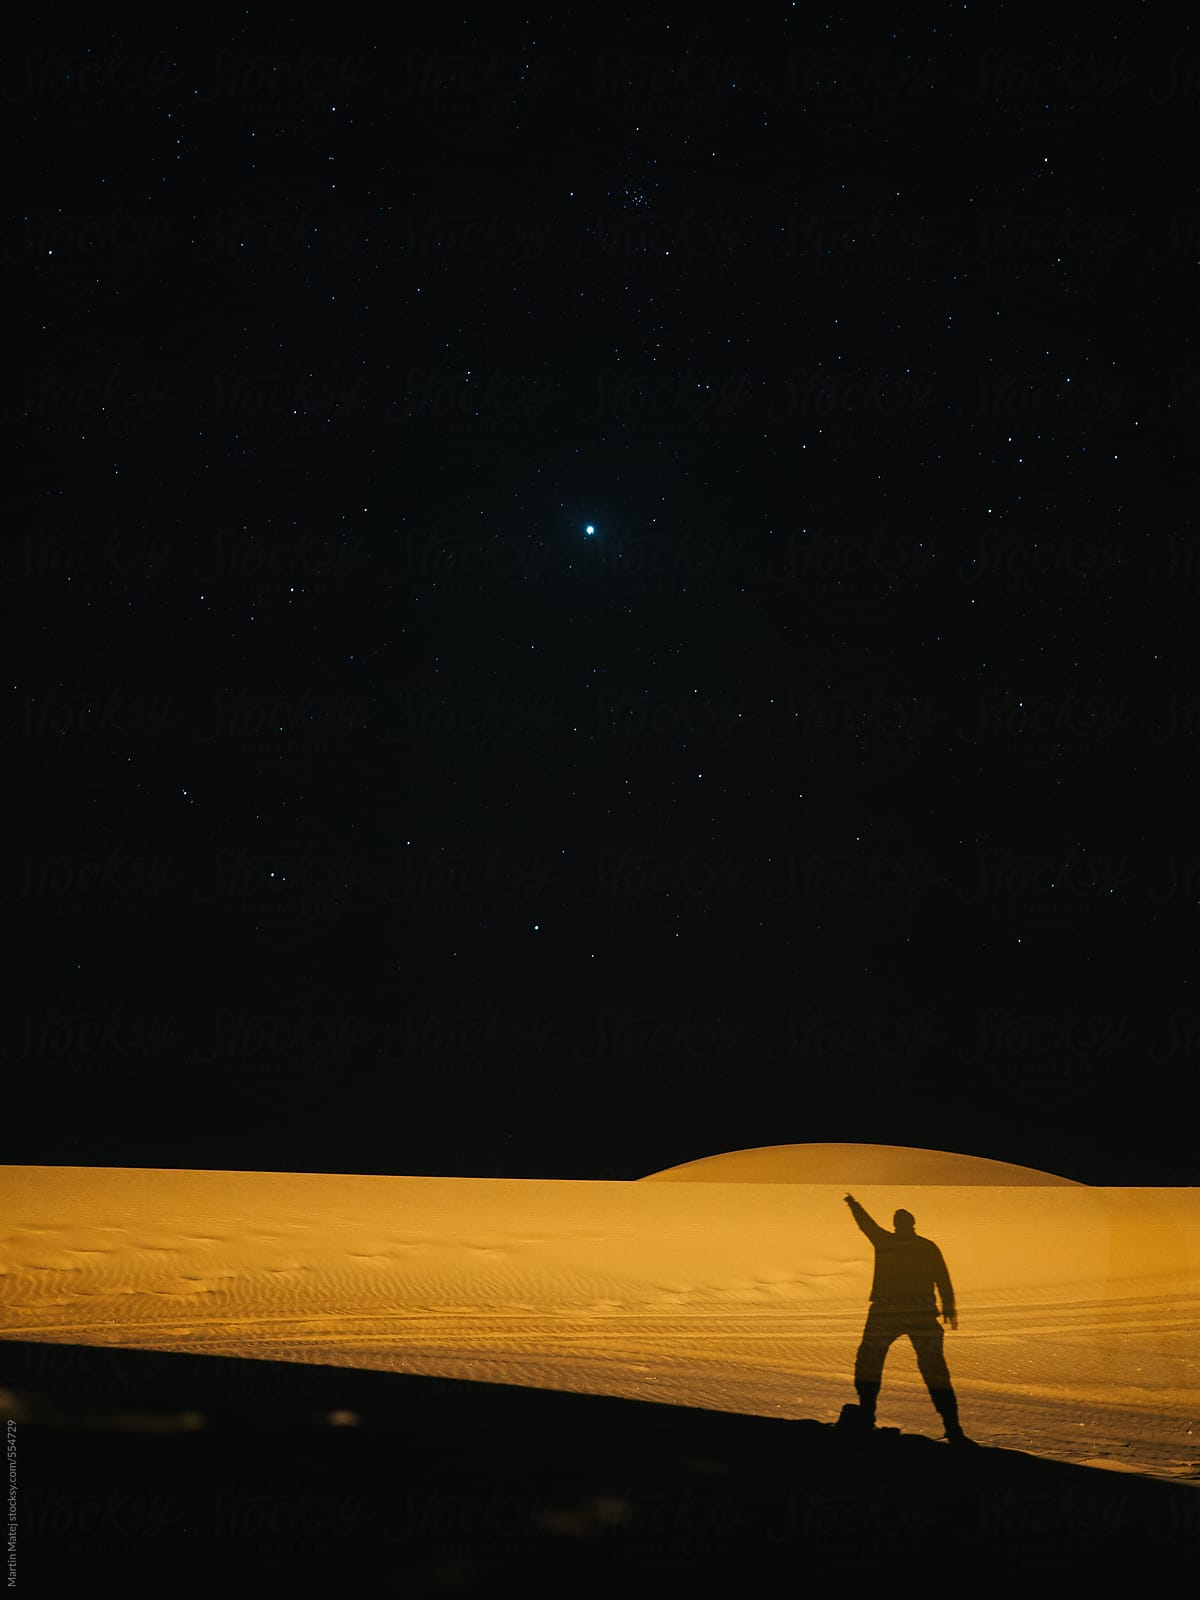 Silhouette in the desert pointing at the stars